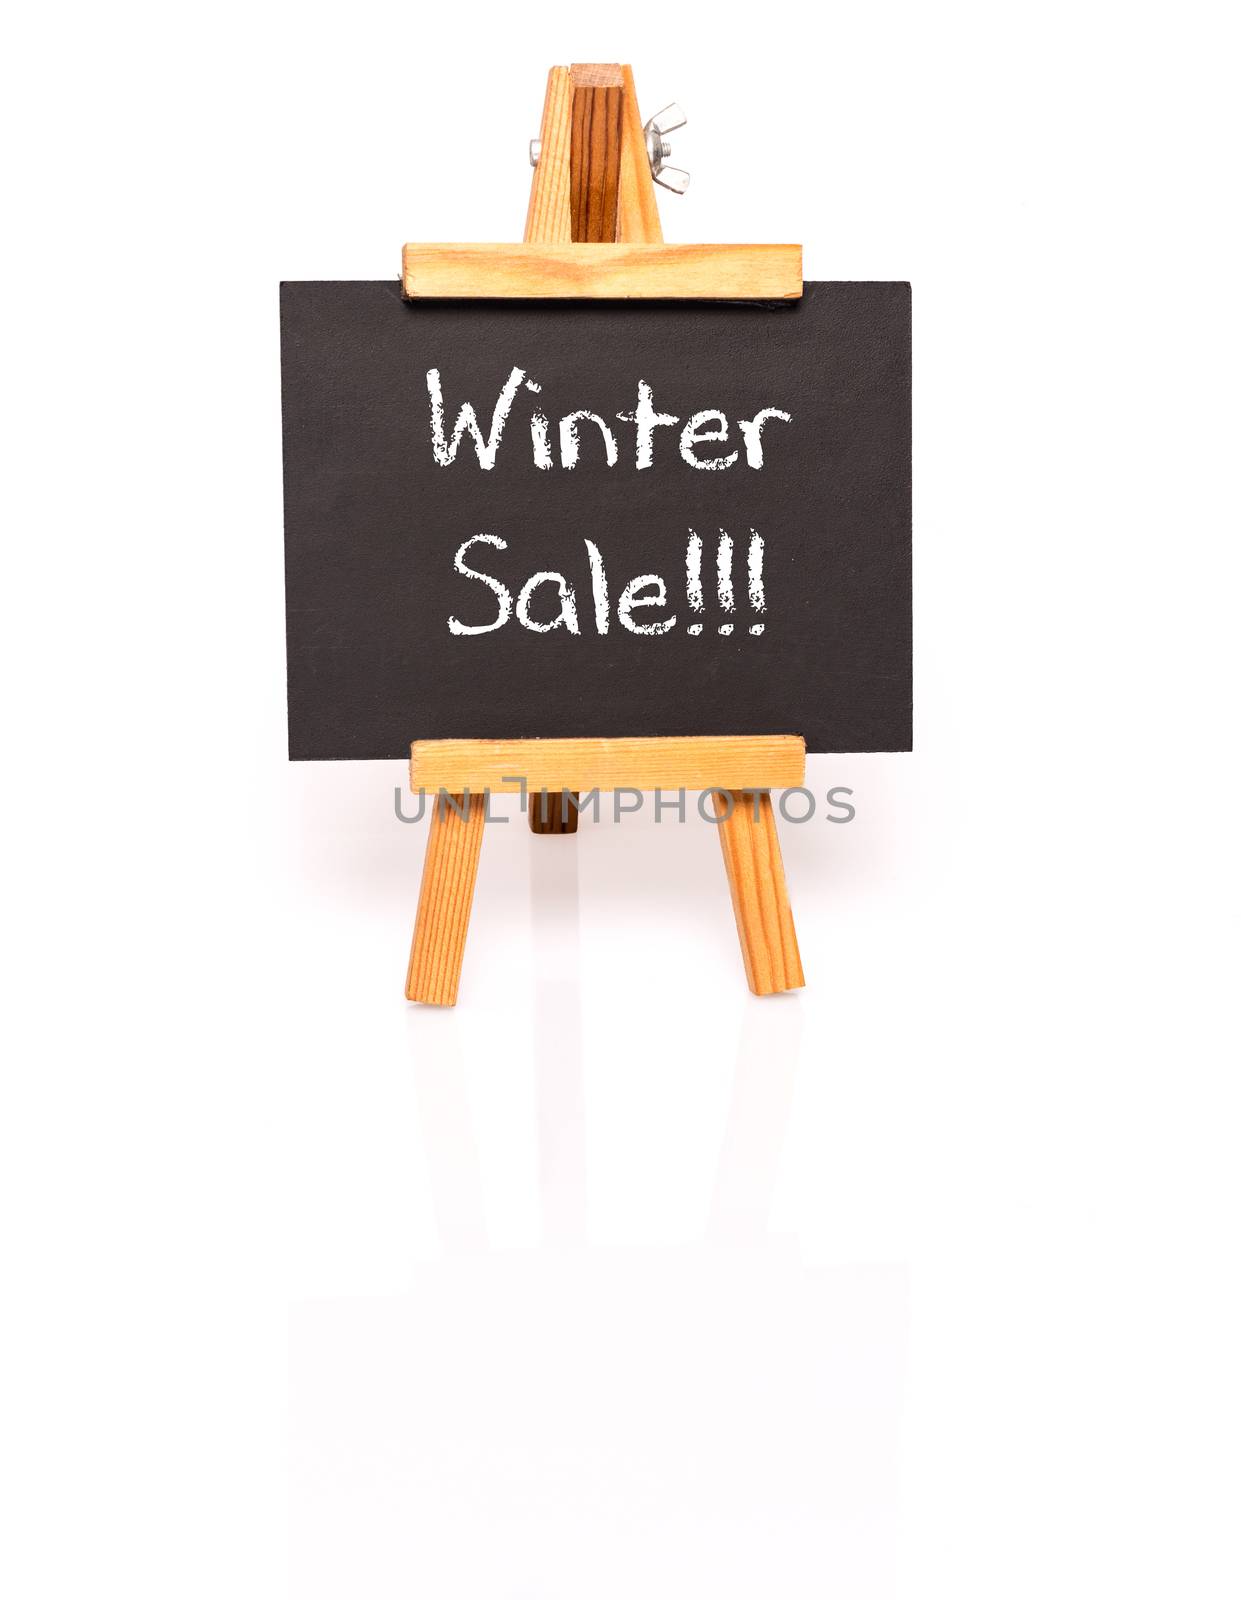 Winter Sale. Blackboard with text and easel. by franky242